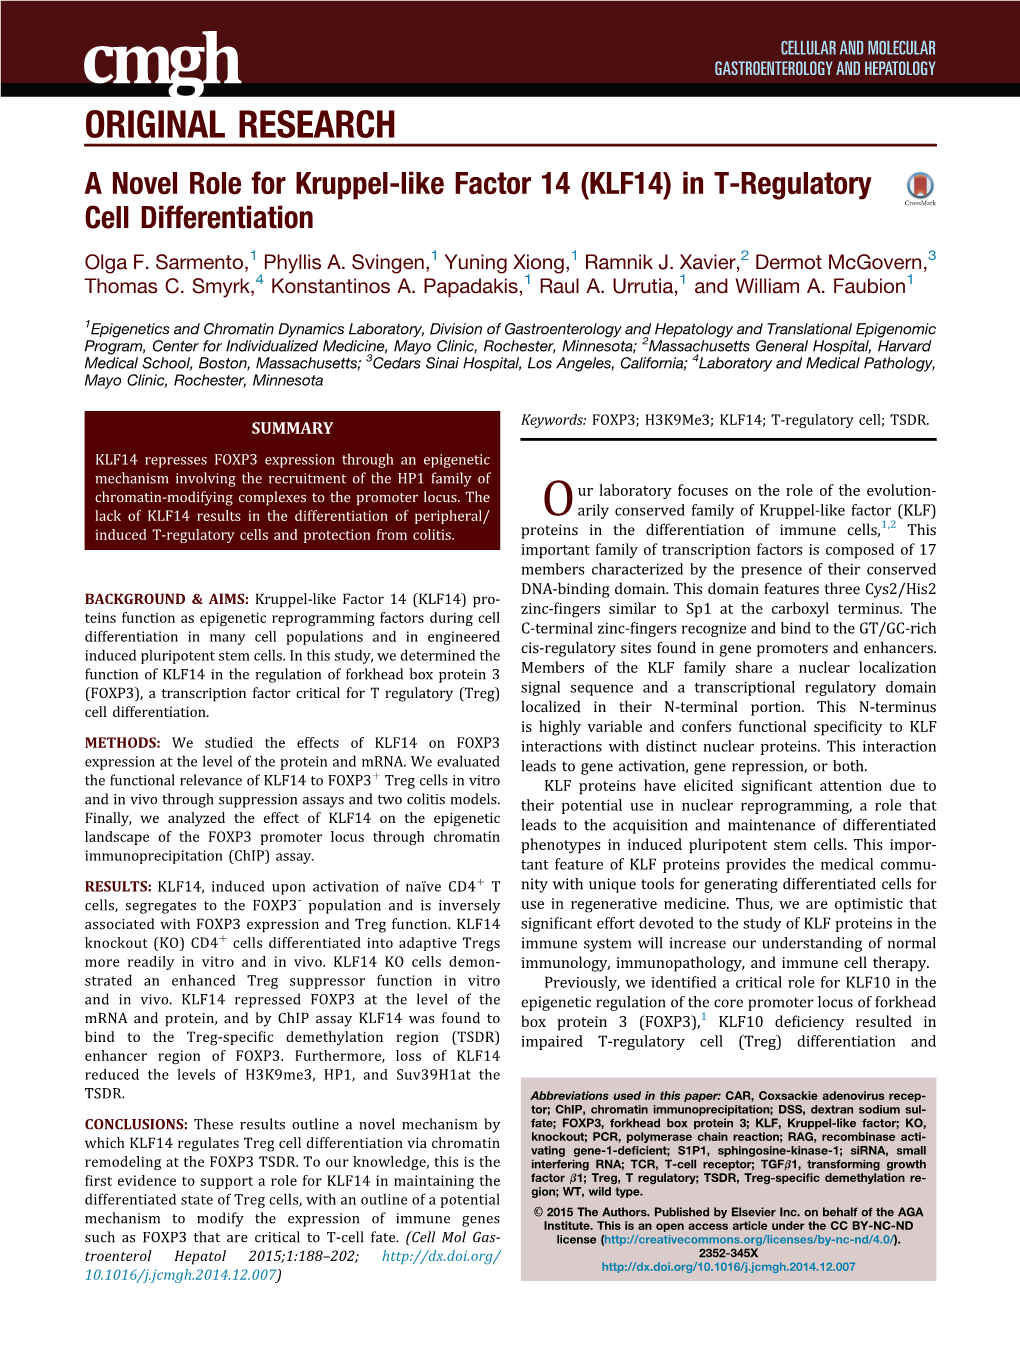 A Novel Role for Kruppel-Like Factor 14 (KLF14) in T-Regulatory Cell Differentiation Olga F